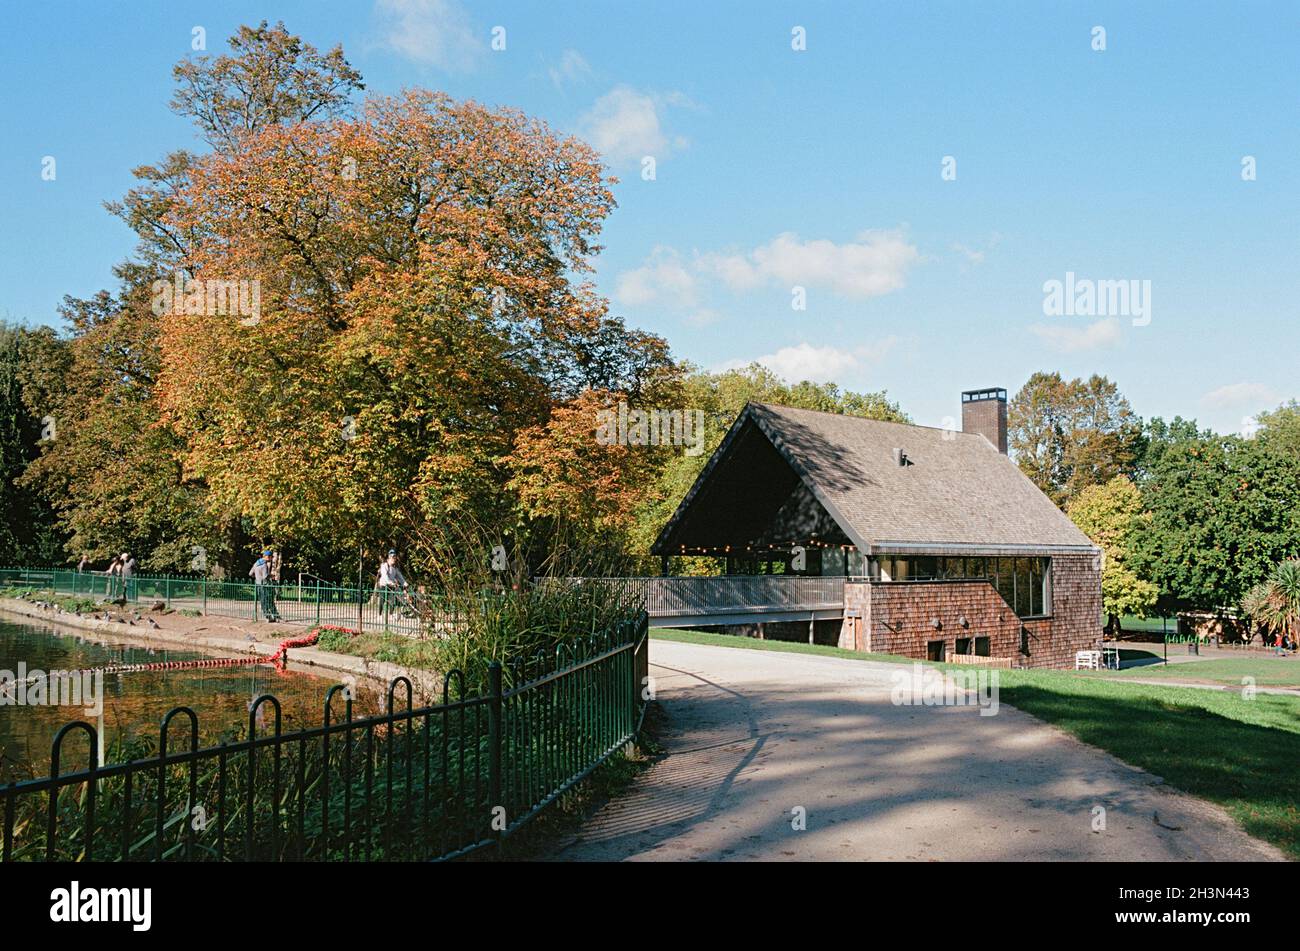 The cafe at Crystal Palace Park, South East London, UK, in autumn Stock Photo